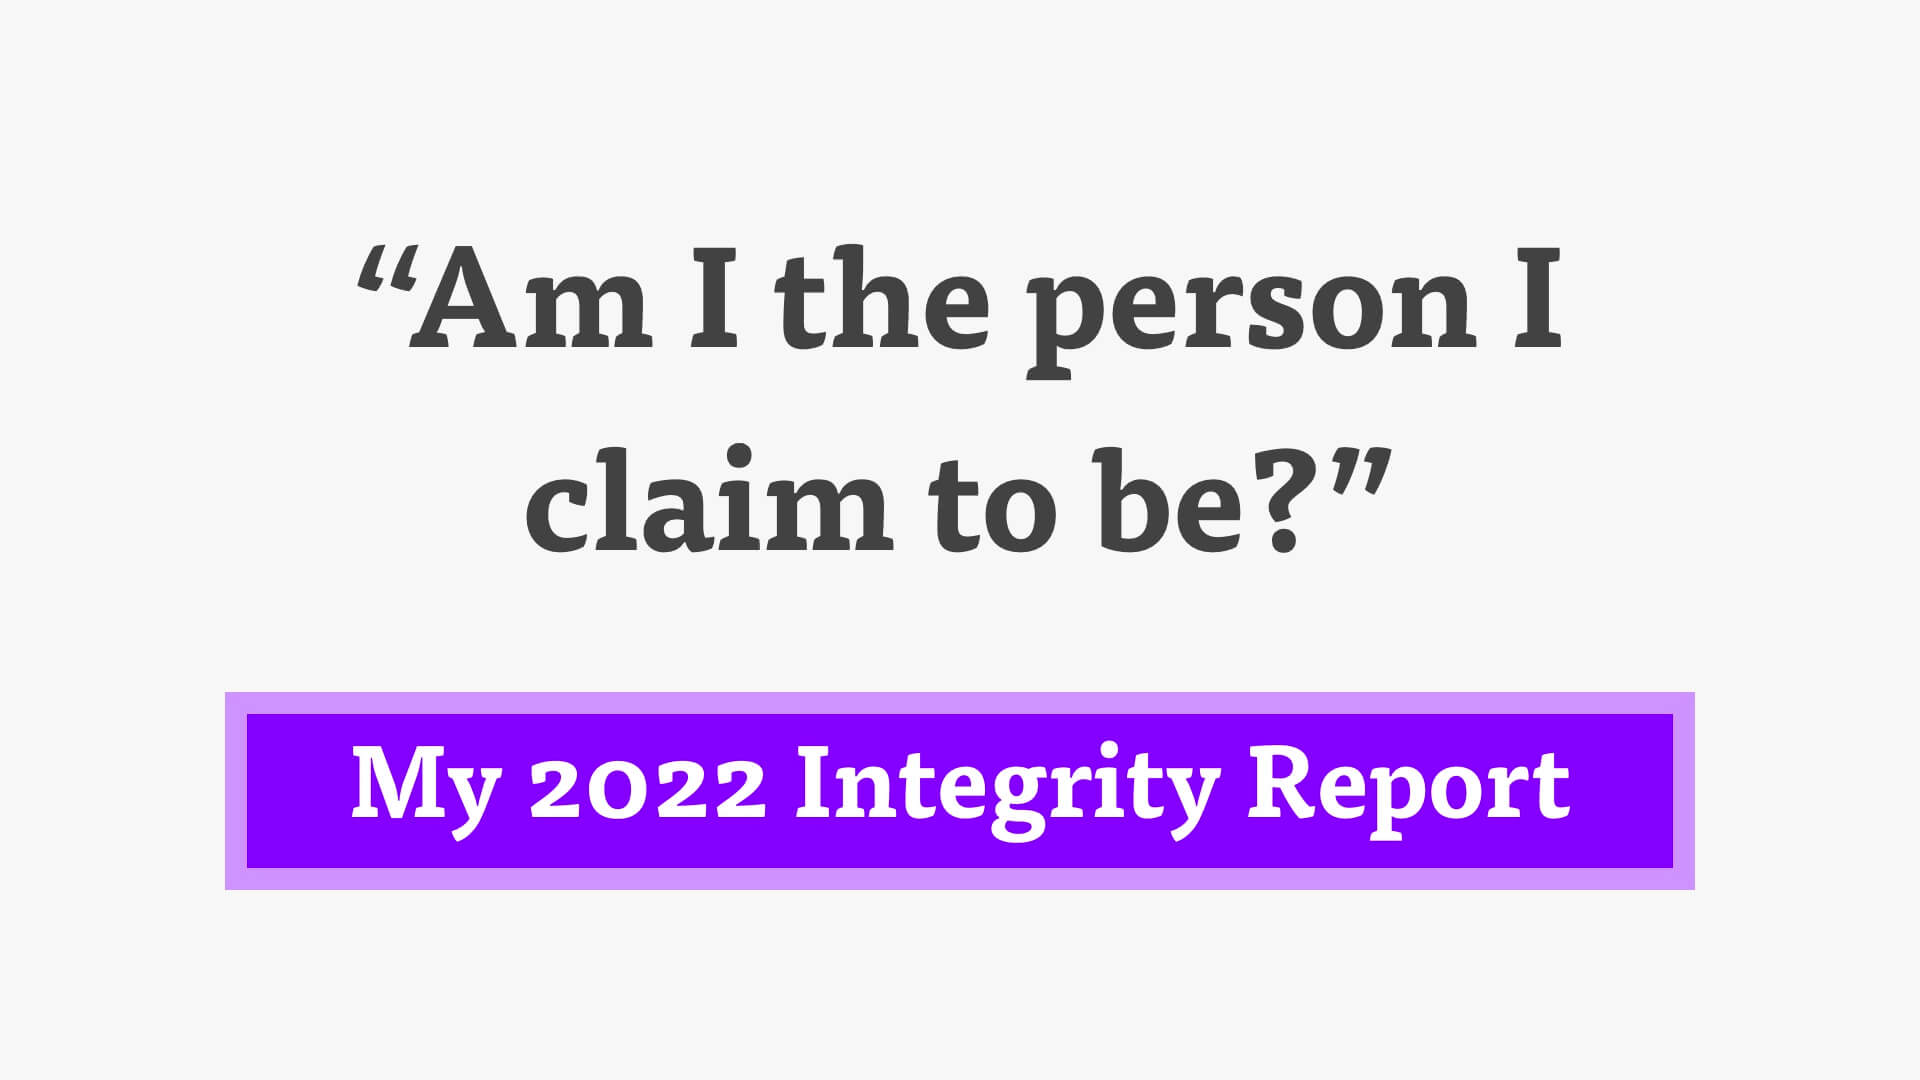 Am I the person I claim to be? My 2022 Integrity Report